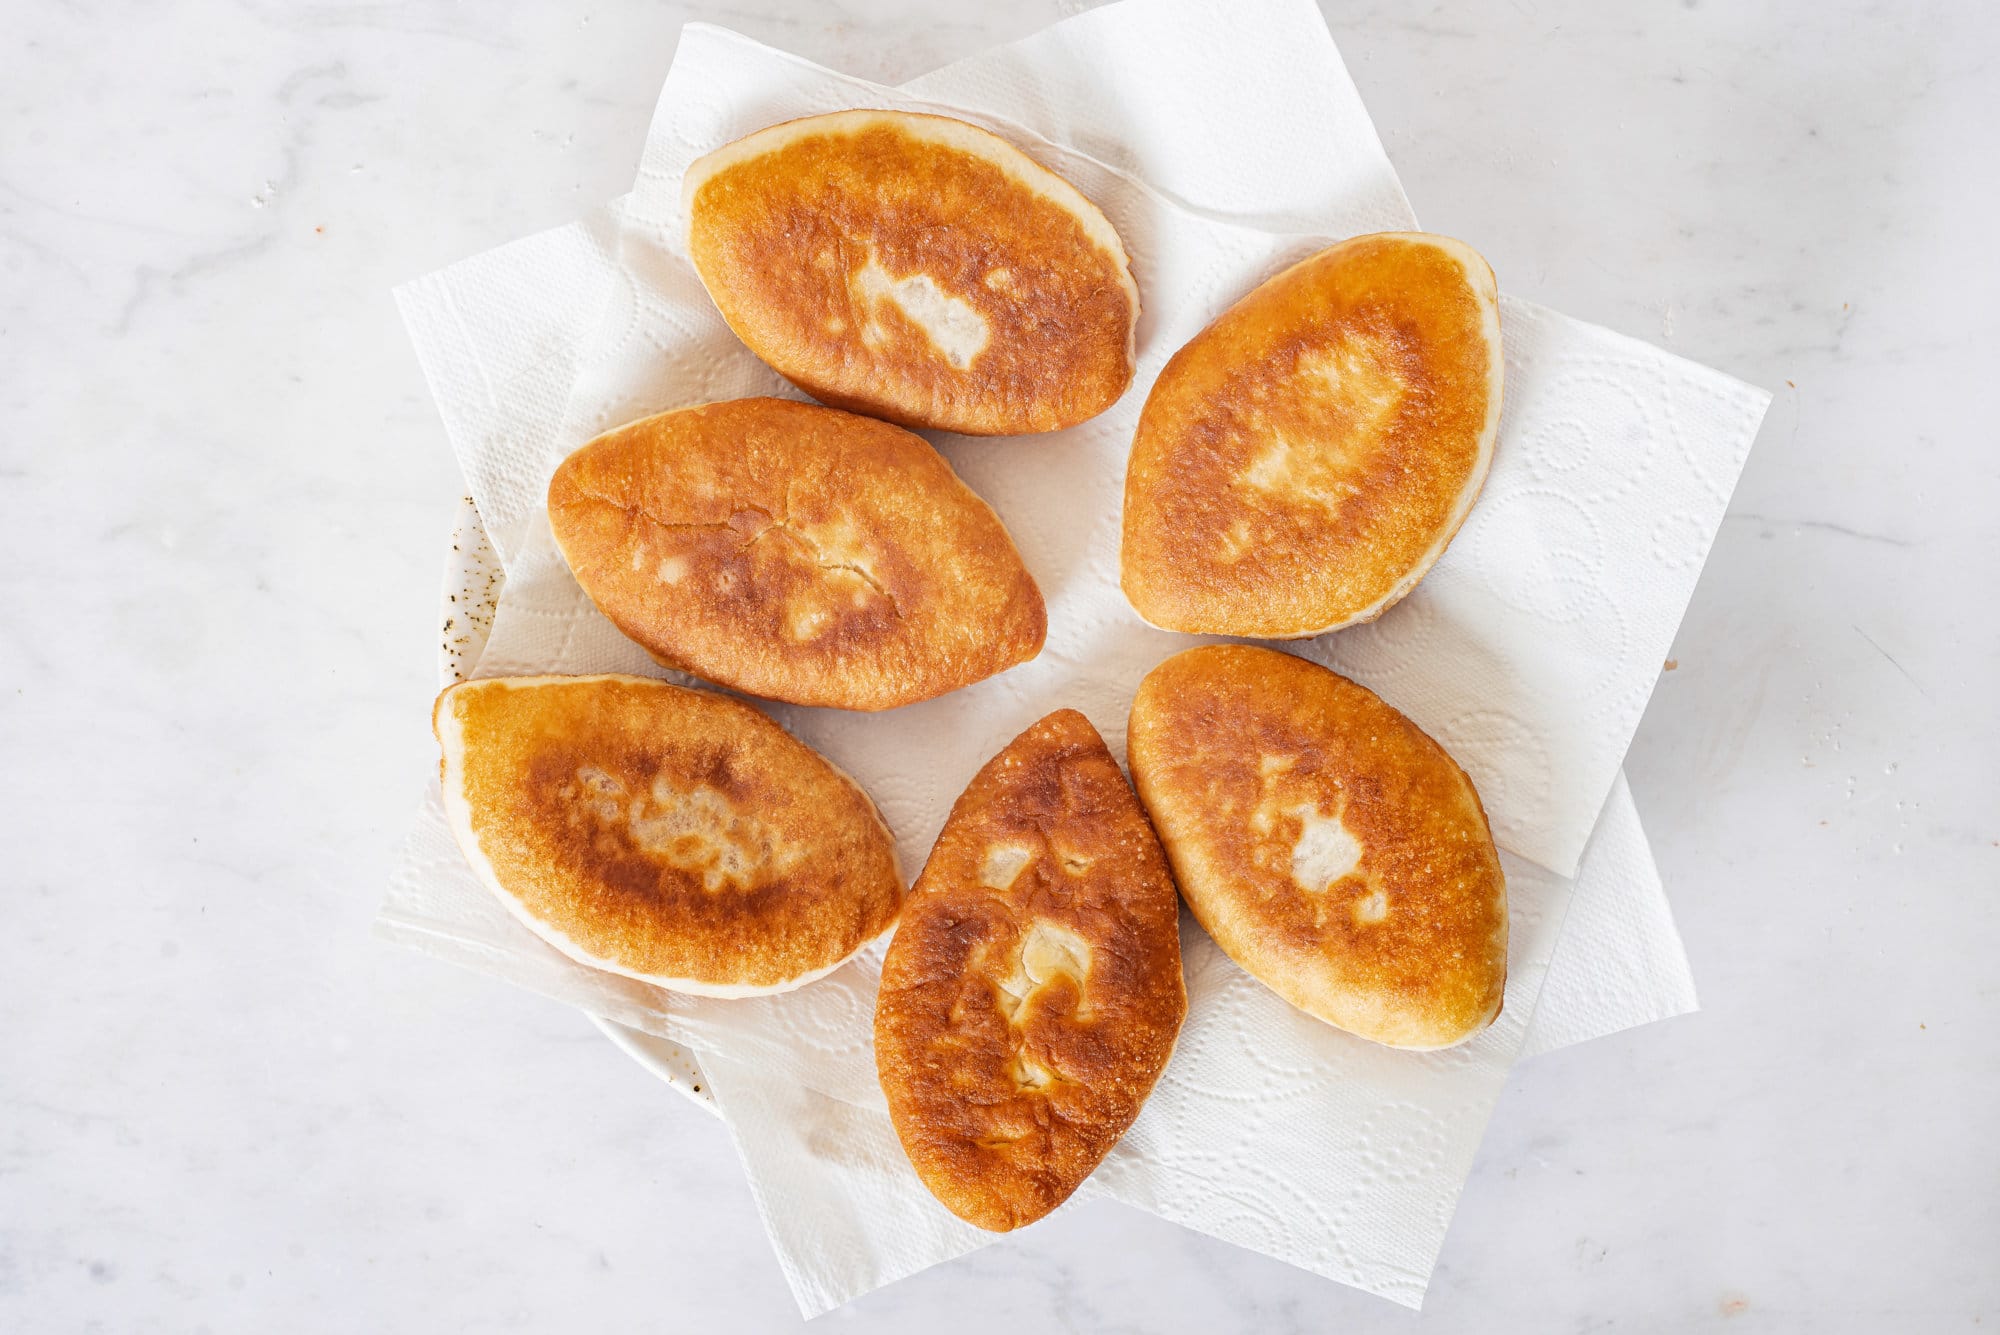 cooked-piroshki-on-white-paper-towels-on-a-plate